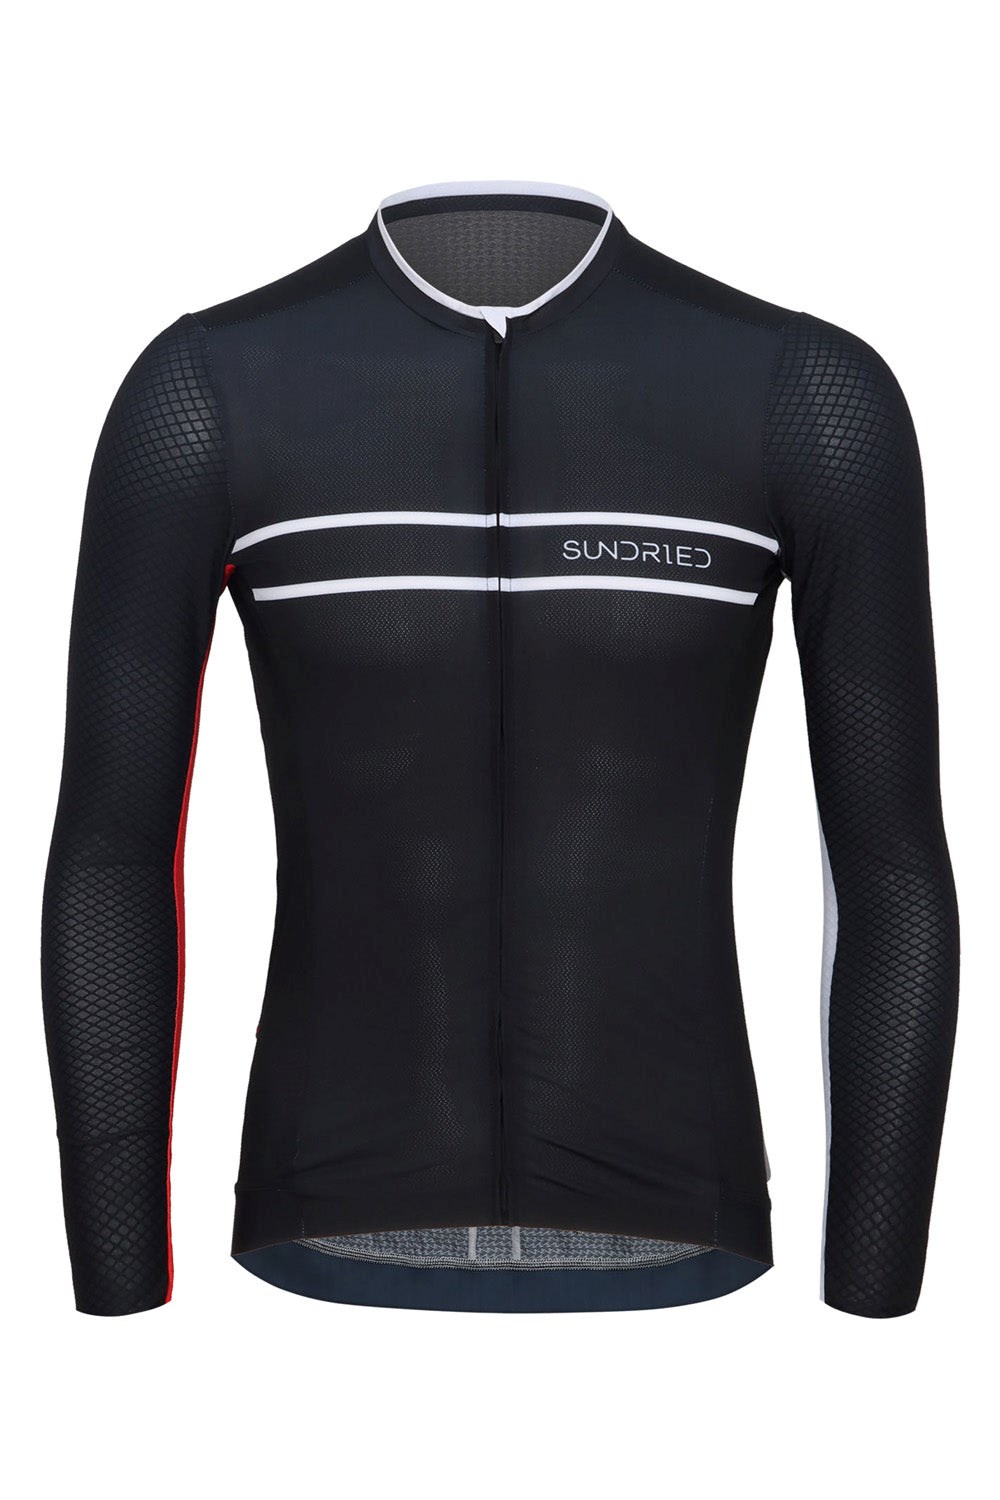 Pro Mens Black Long Sleeve Cycle Jersey -